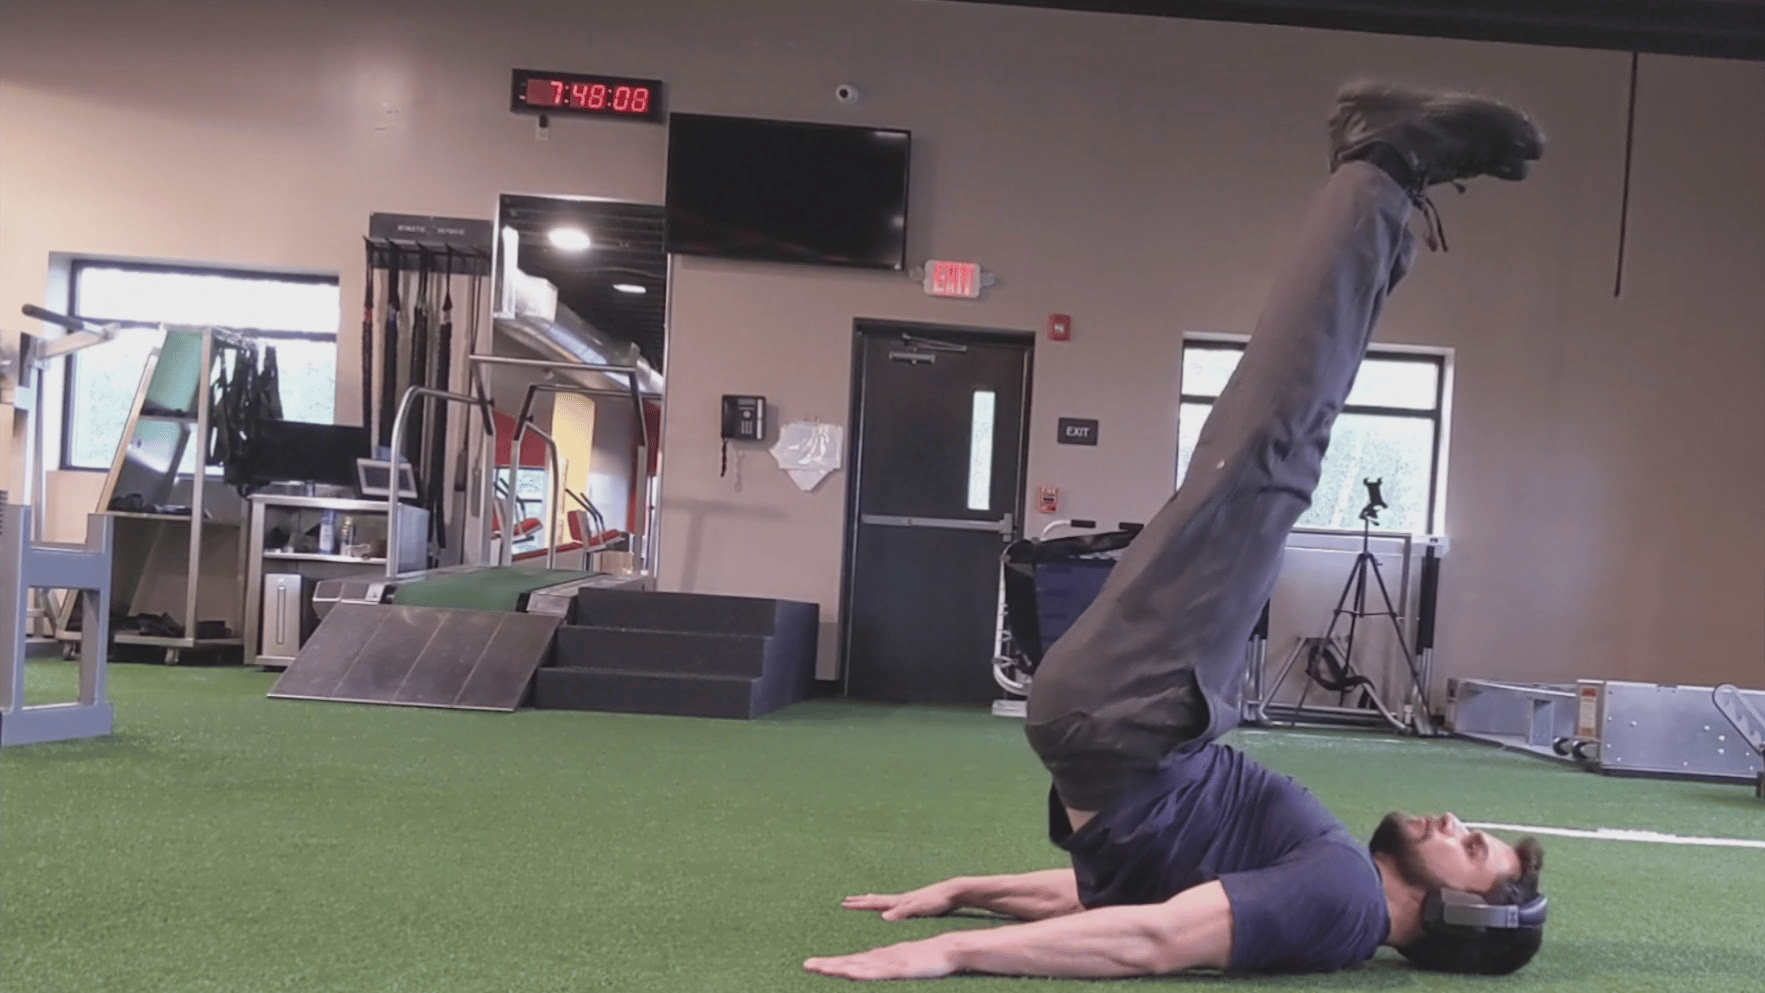 L Sit Leg Lifts: 6 Progressions & Conditioning Exercises For The LSit 